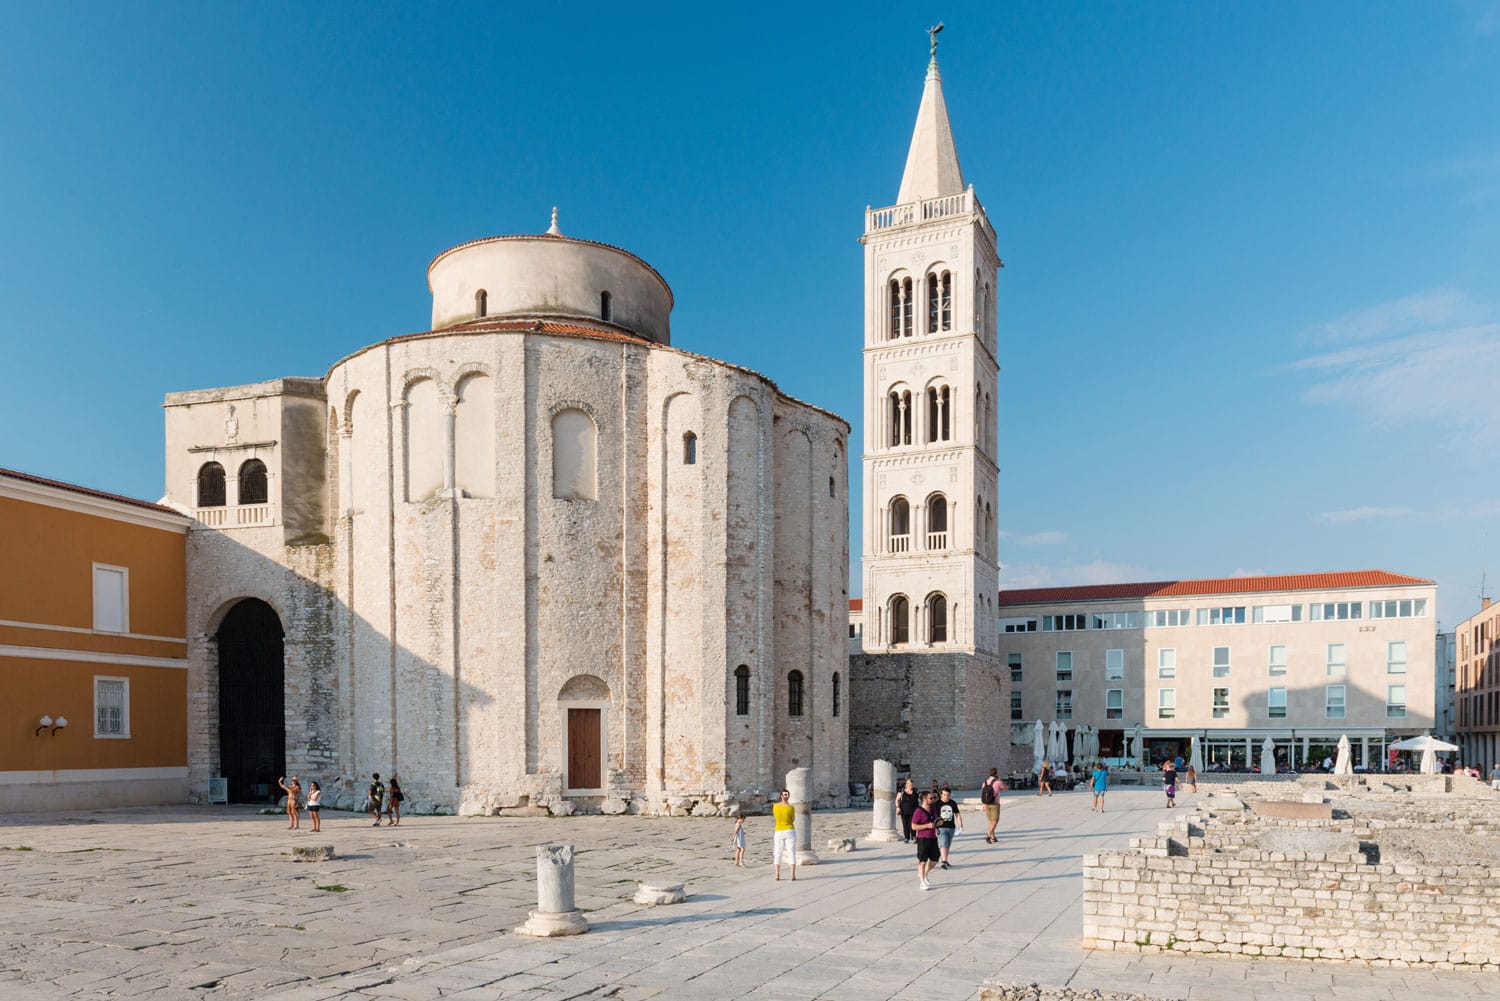 St. Donat church, forum and Cathedral of St. Anastasia bell tower in Zadar, Croatia